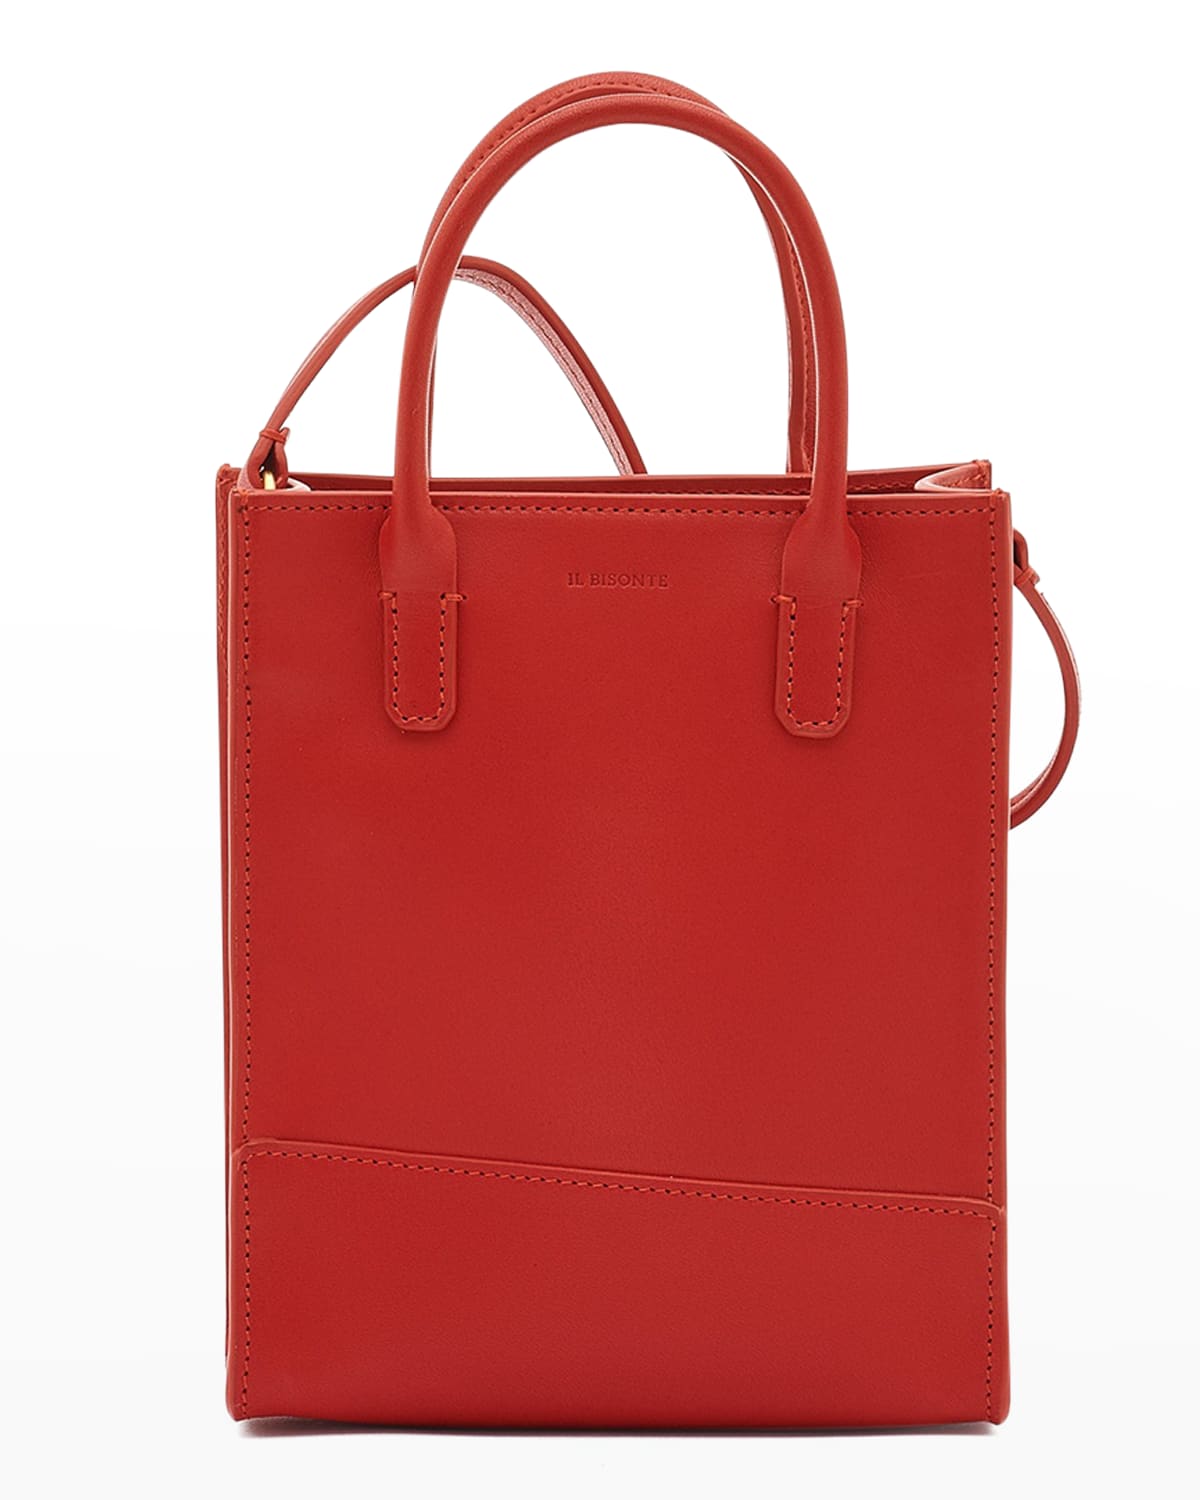 Il Bisonte Mini Sole Leather Top-handle Bag In Red